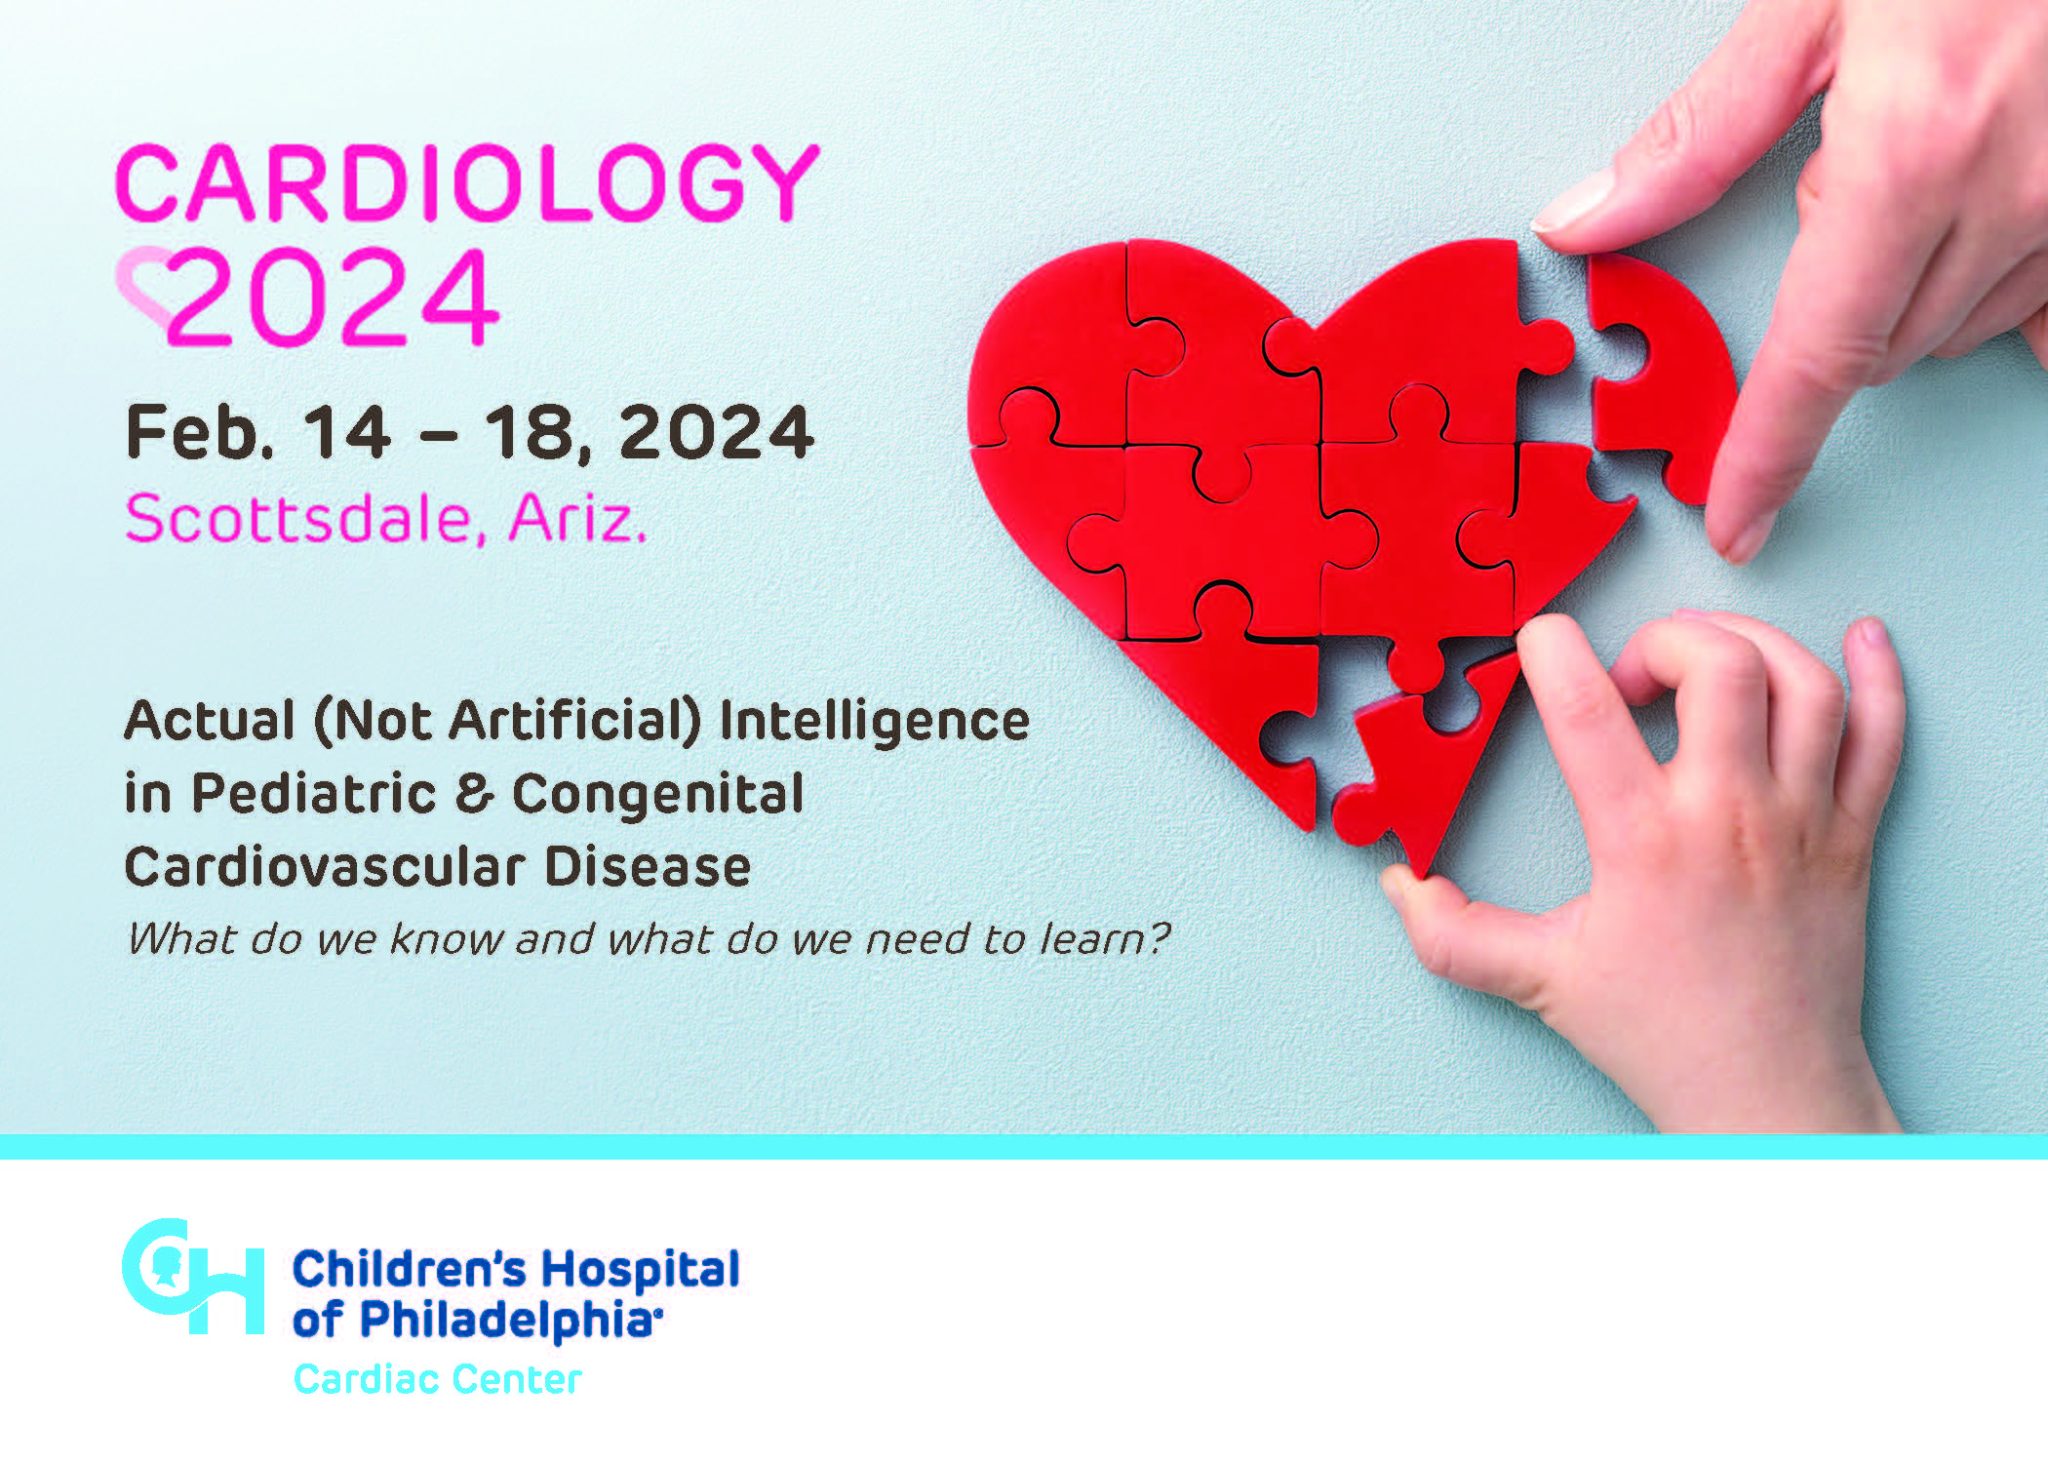 Cardiology 2024 CHOP Conference Advanced Cardiac Therapies